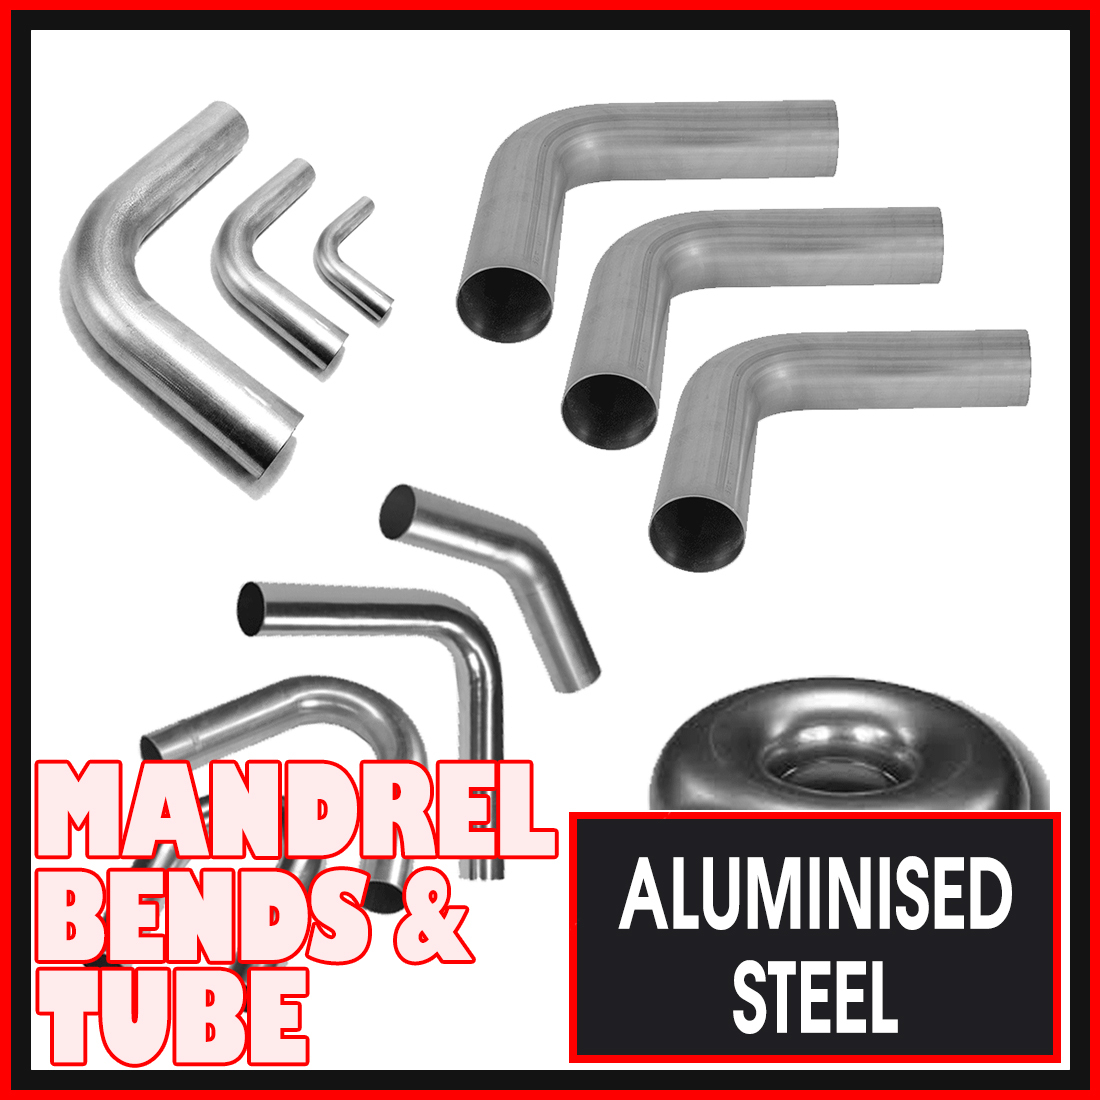 4" Aluminised Mild Steel Mandrel Bends and Exhaust Pipe image